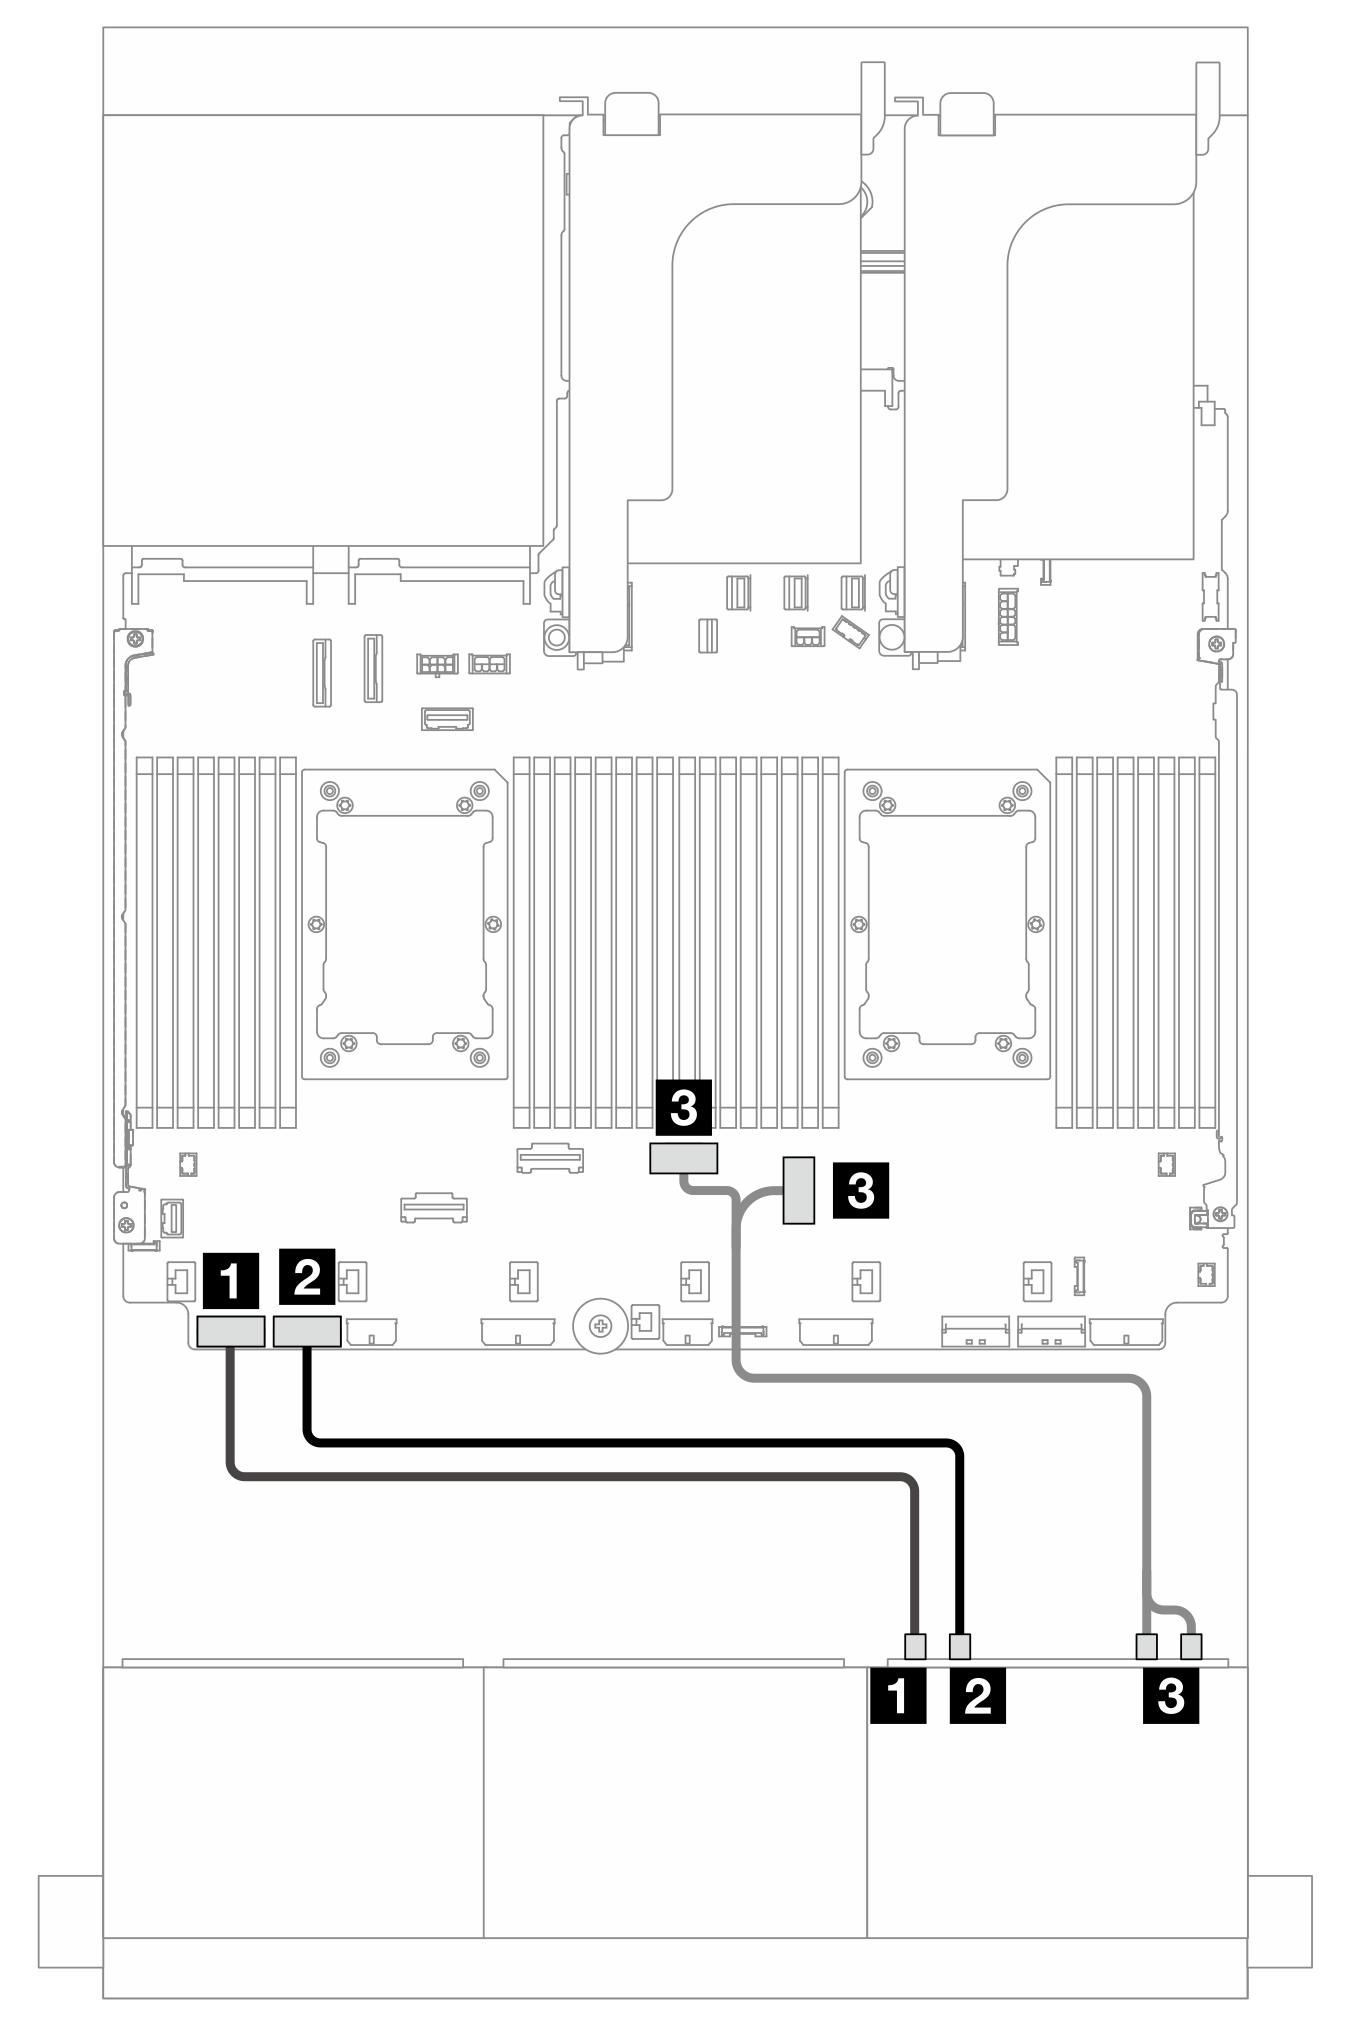 Cable routing when two processors installed